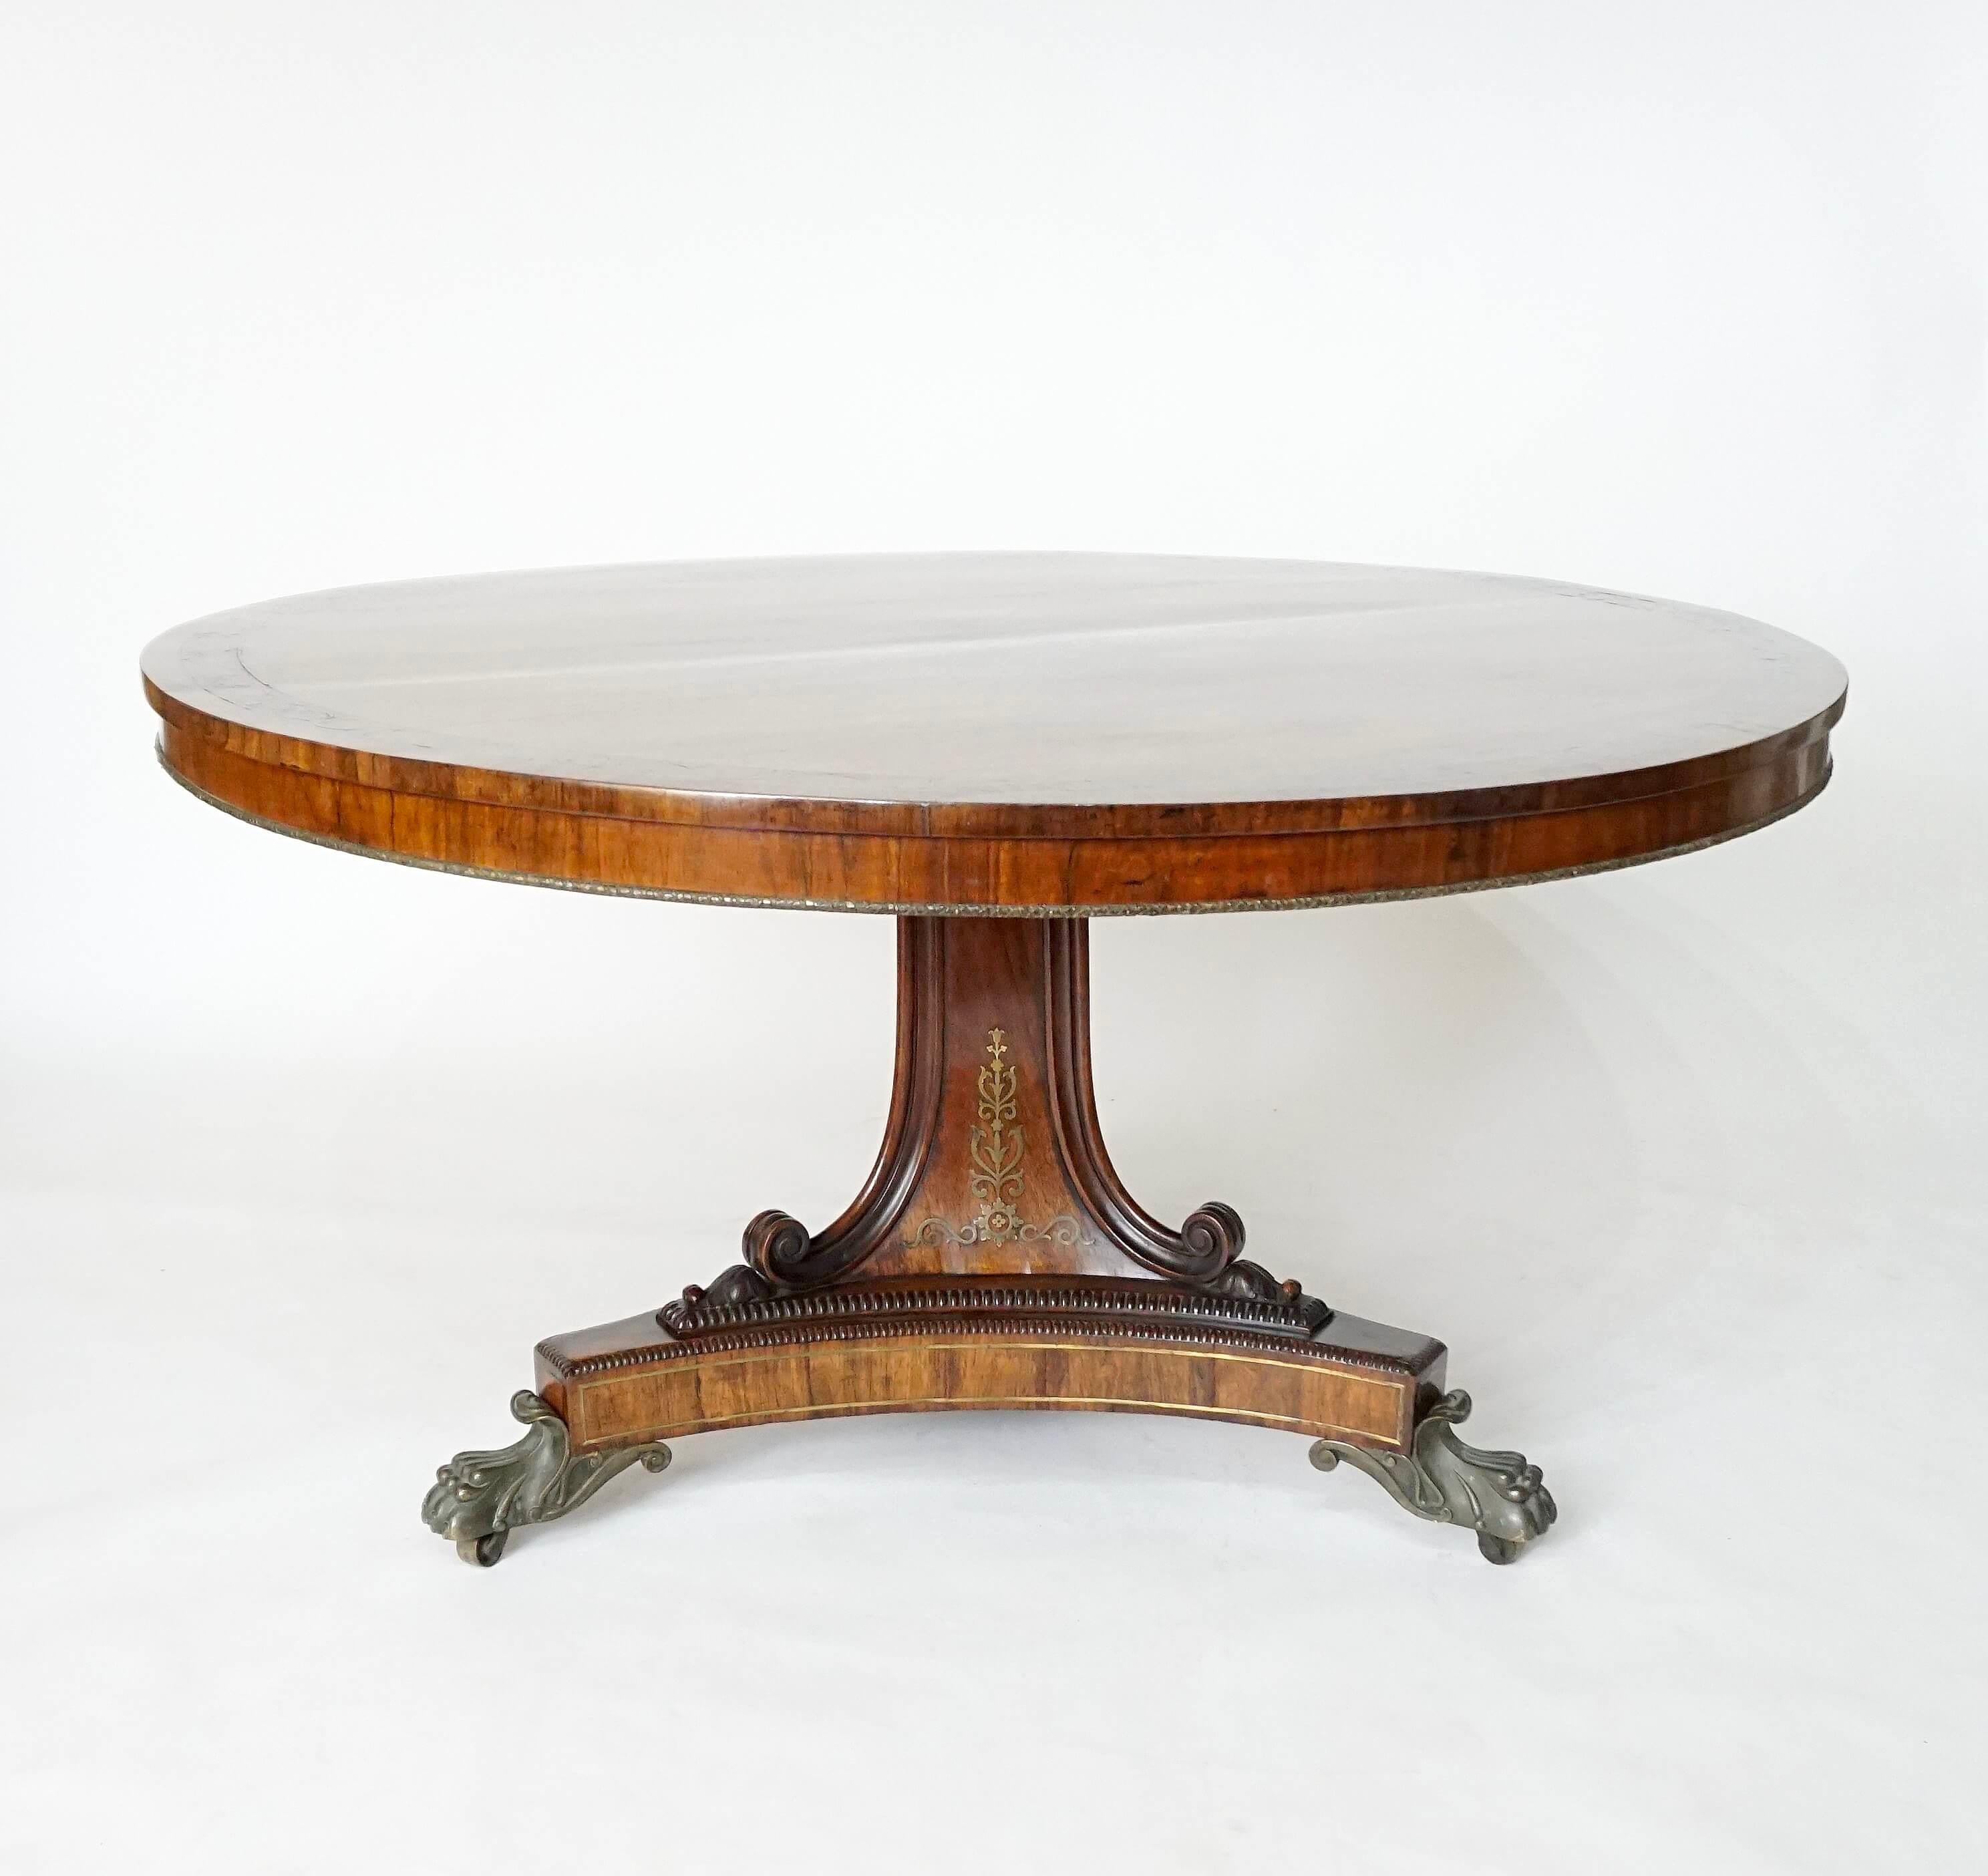 Elegant circa 1820 English Regency rosewood-veneered mahogany center table; the tilting top with foliate rinceau brass inlaid border with moulded brass ribbon-bound foliate garland bottom edge on foliate brass inlaid center trigonal pedestal support